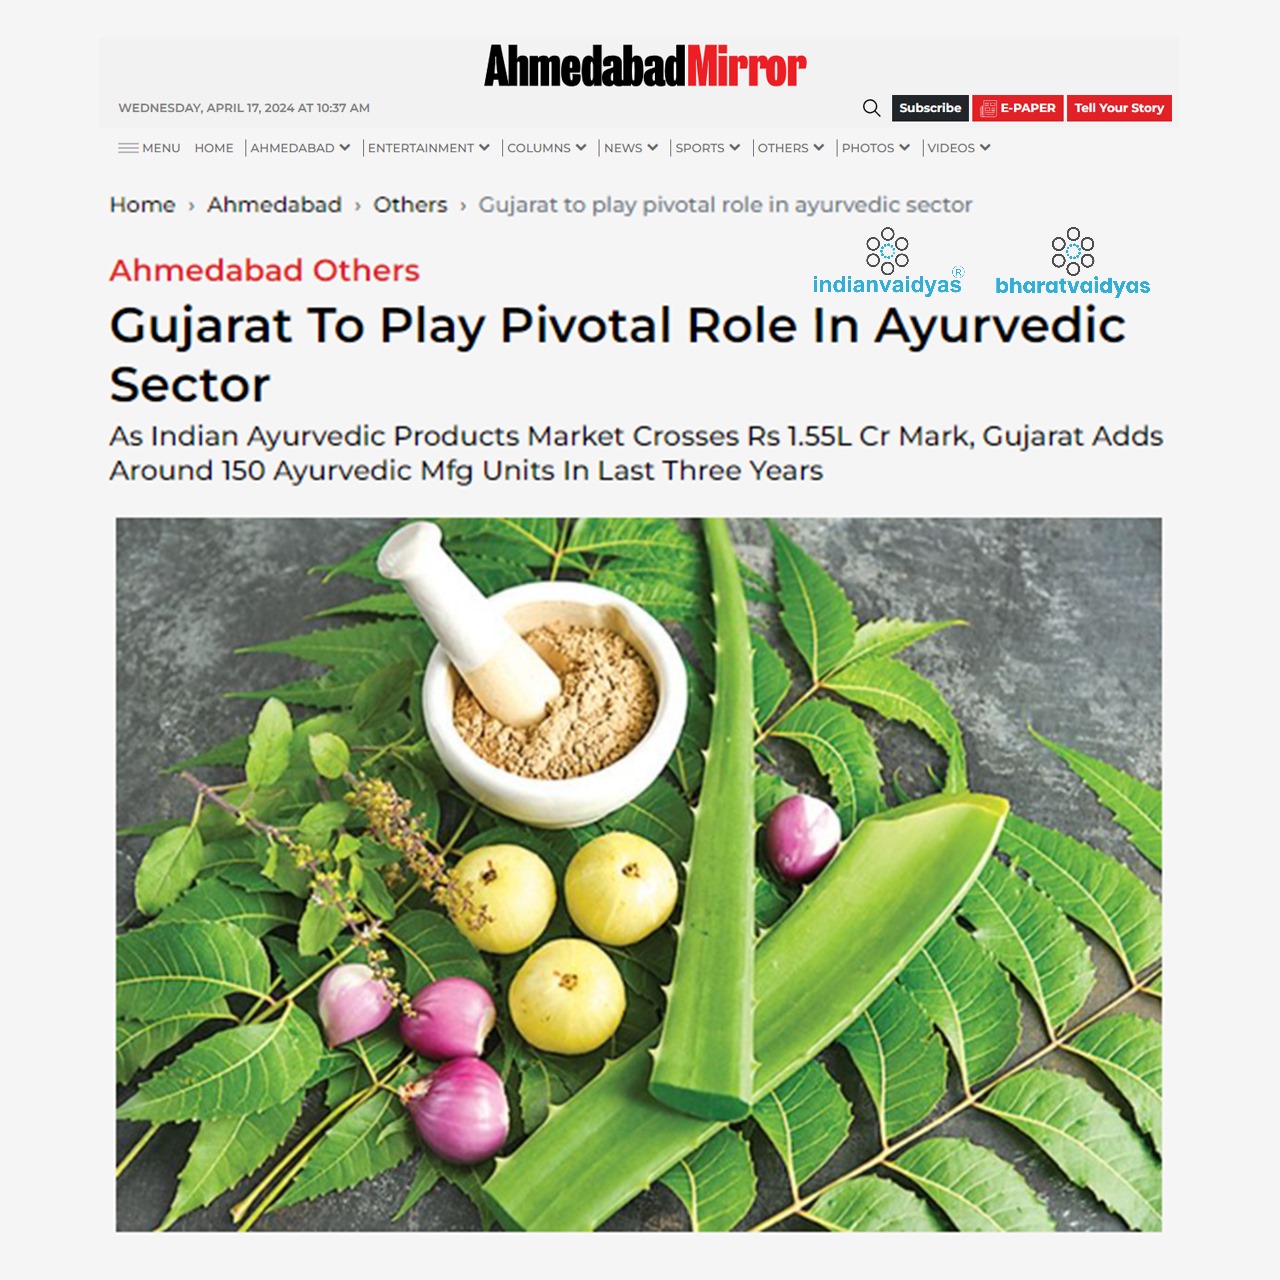 Gujarat To Play Pivotal Role In Ayurvedic Sector